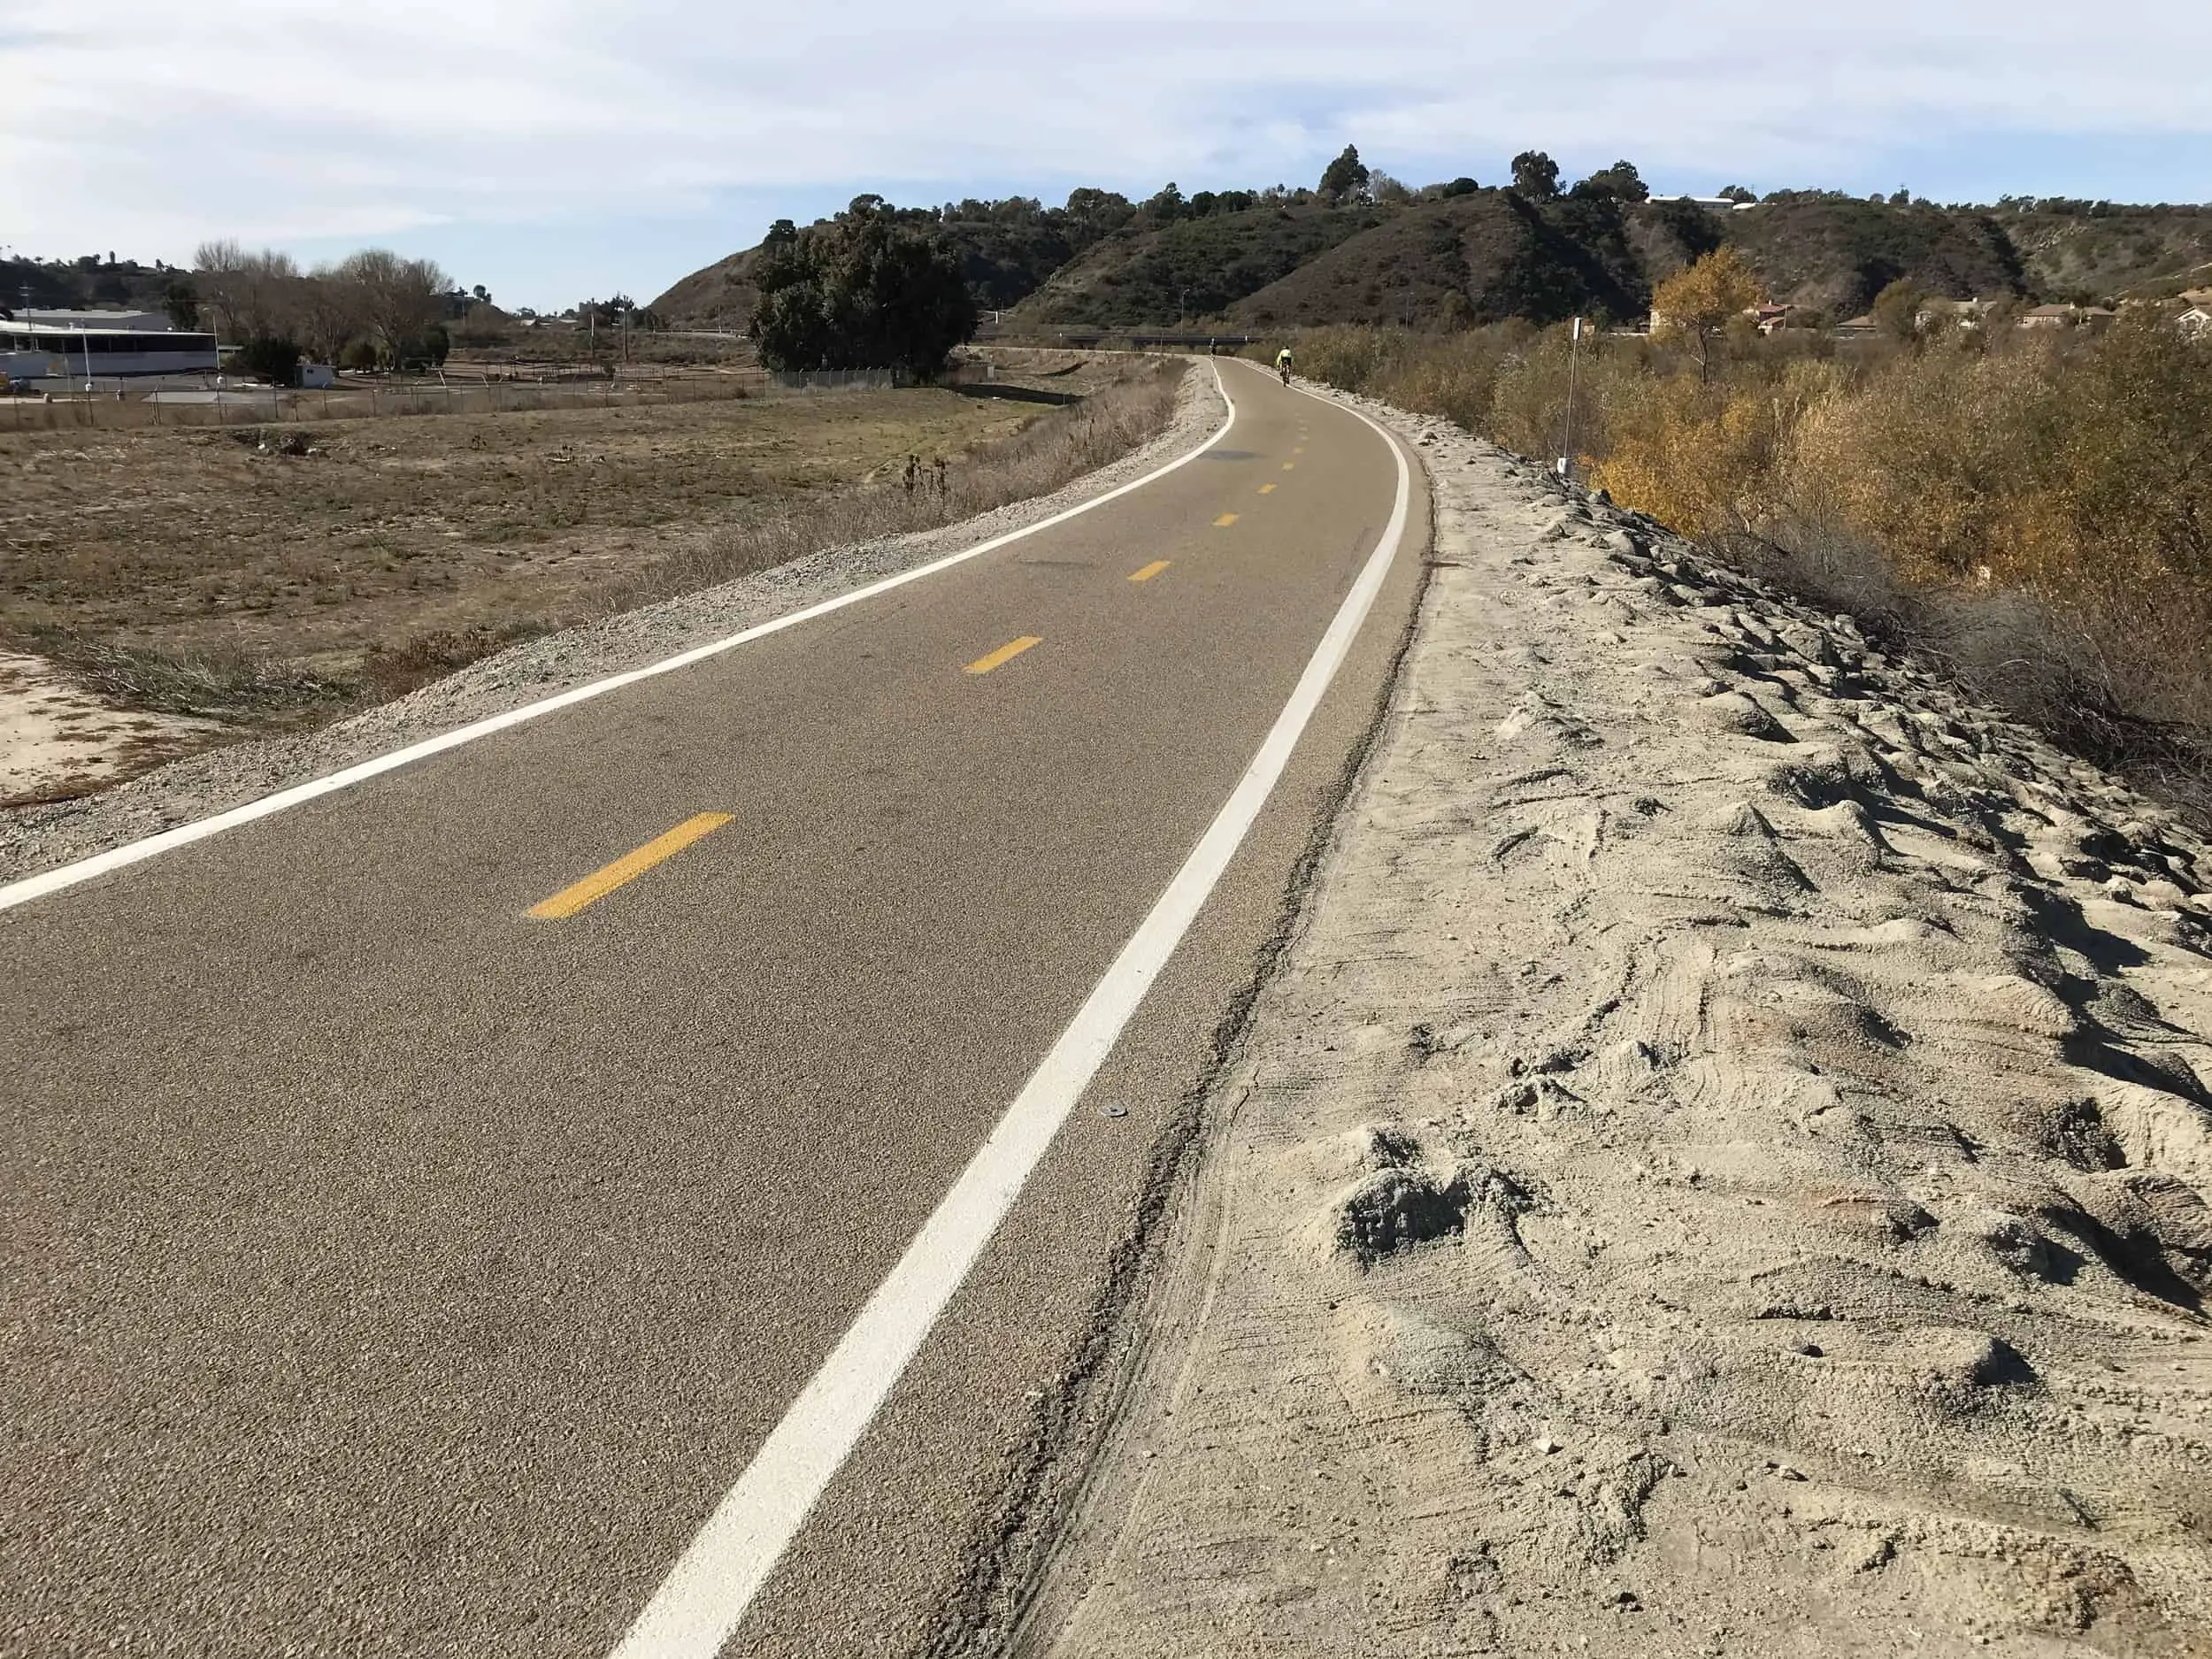 a paved bike lane running through a desert brush landscape. tan bushes and grass and hills. partly cloudy sky. San Luis Rey River Trail in Oceanside, California, United States of America